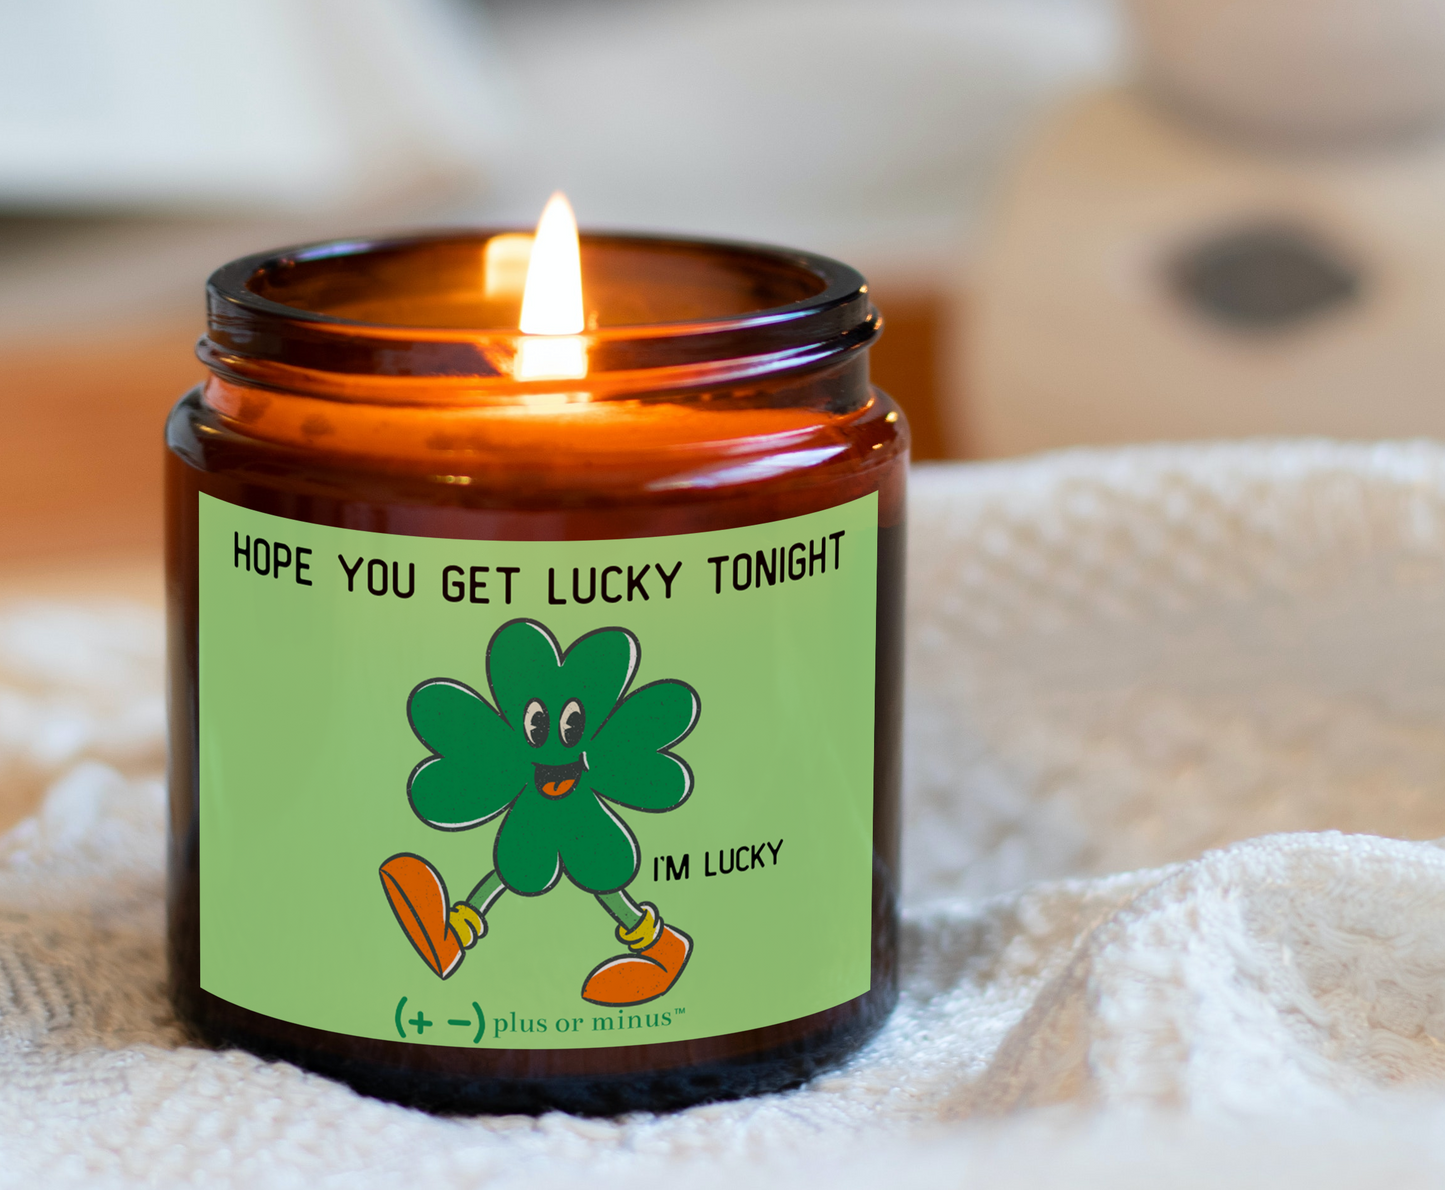 Hope You Get Lucky Tonight (I'm Lucky)